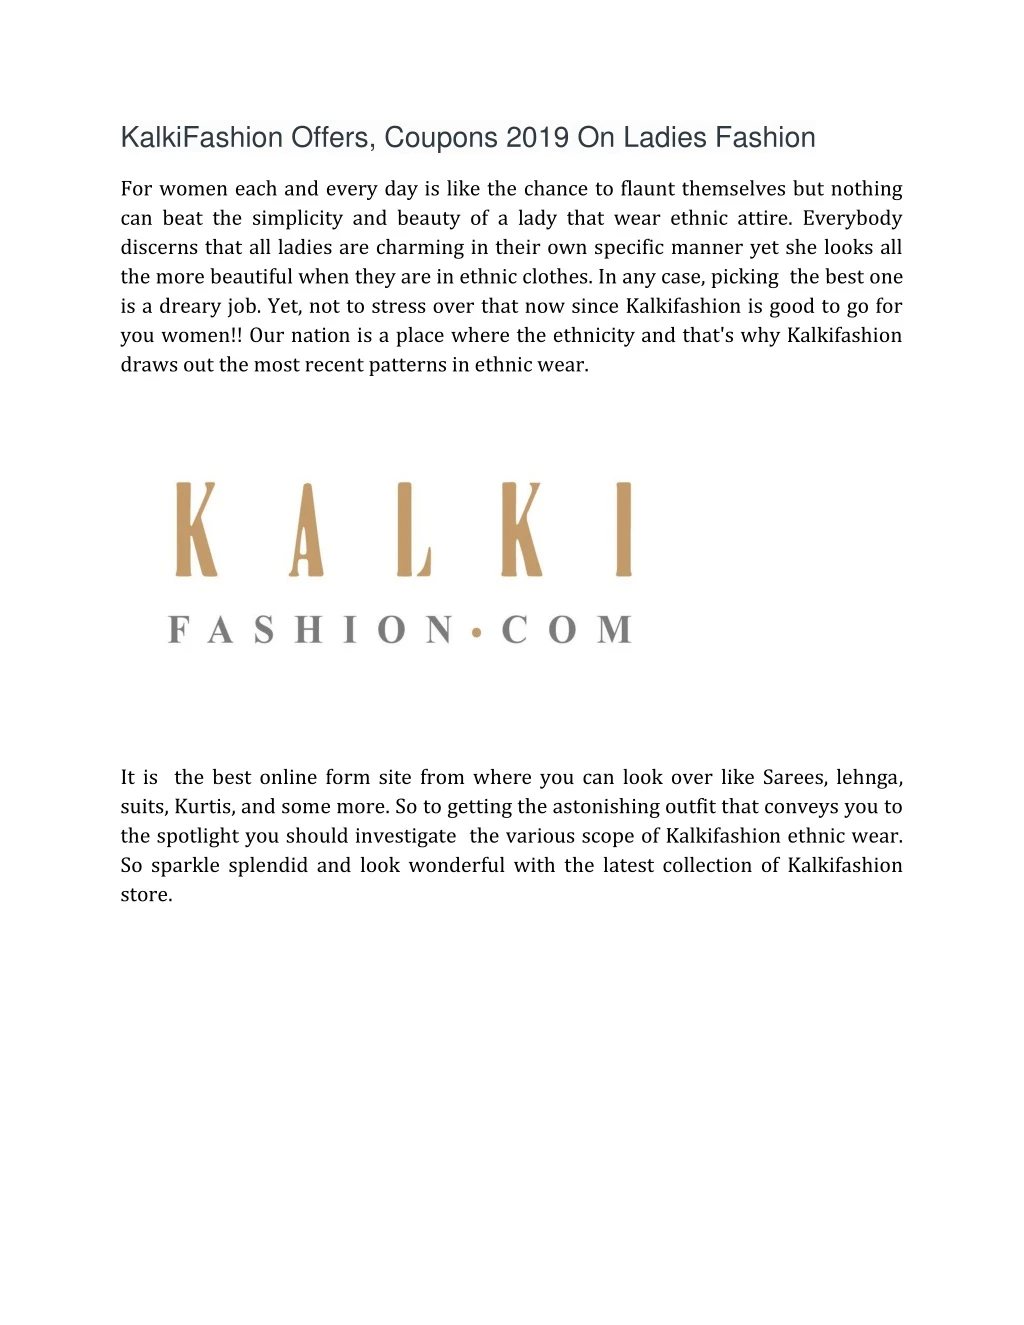 kalkifashion offers coupons 2019 on ladies fashion